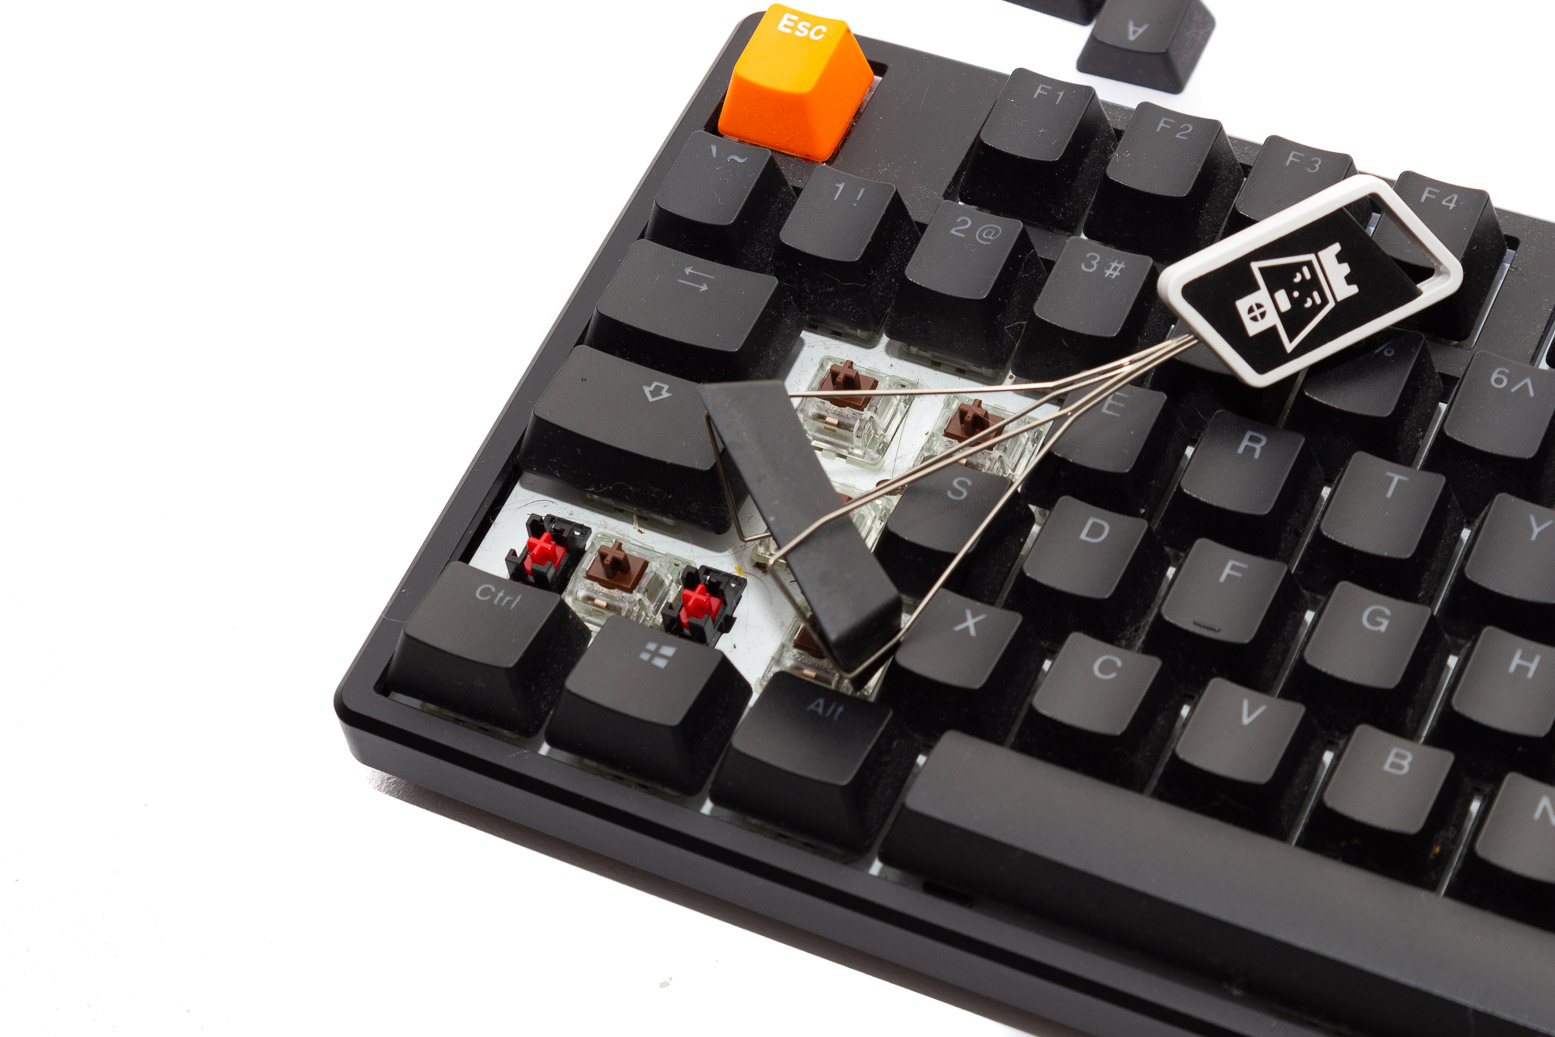 Clean the key switch and the underside of the keycap using compressed air or a soft brush.
Reattach the keycap by aligning it properly and pressing it down firmly until it snaps into place.